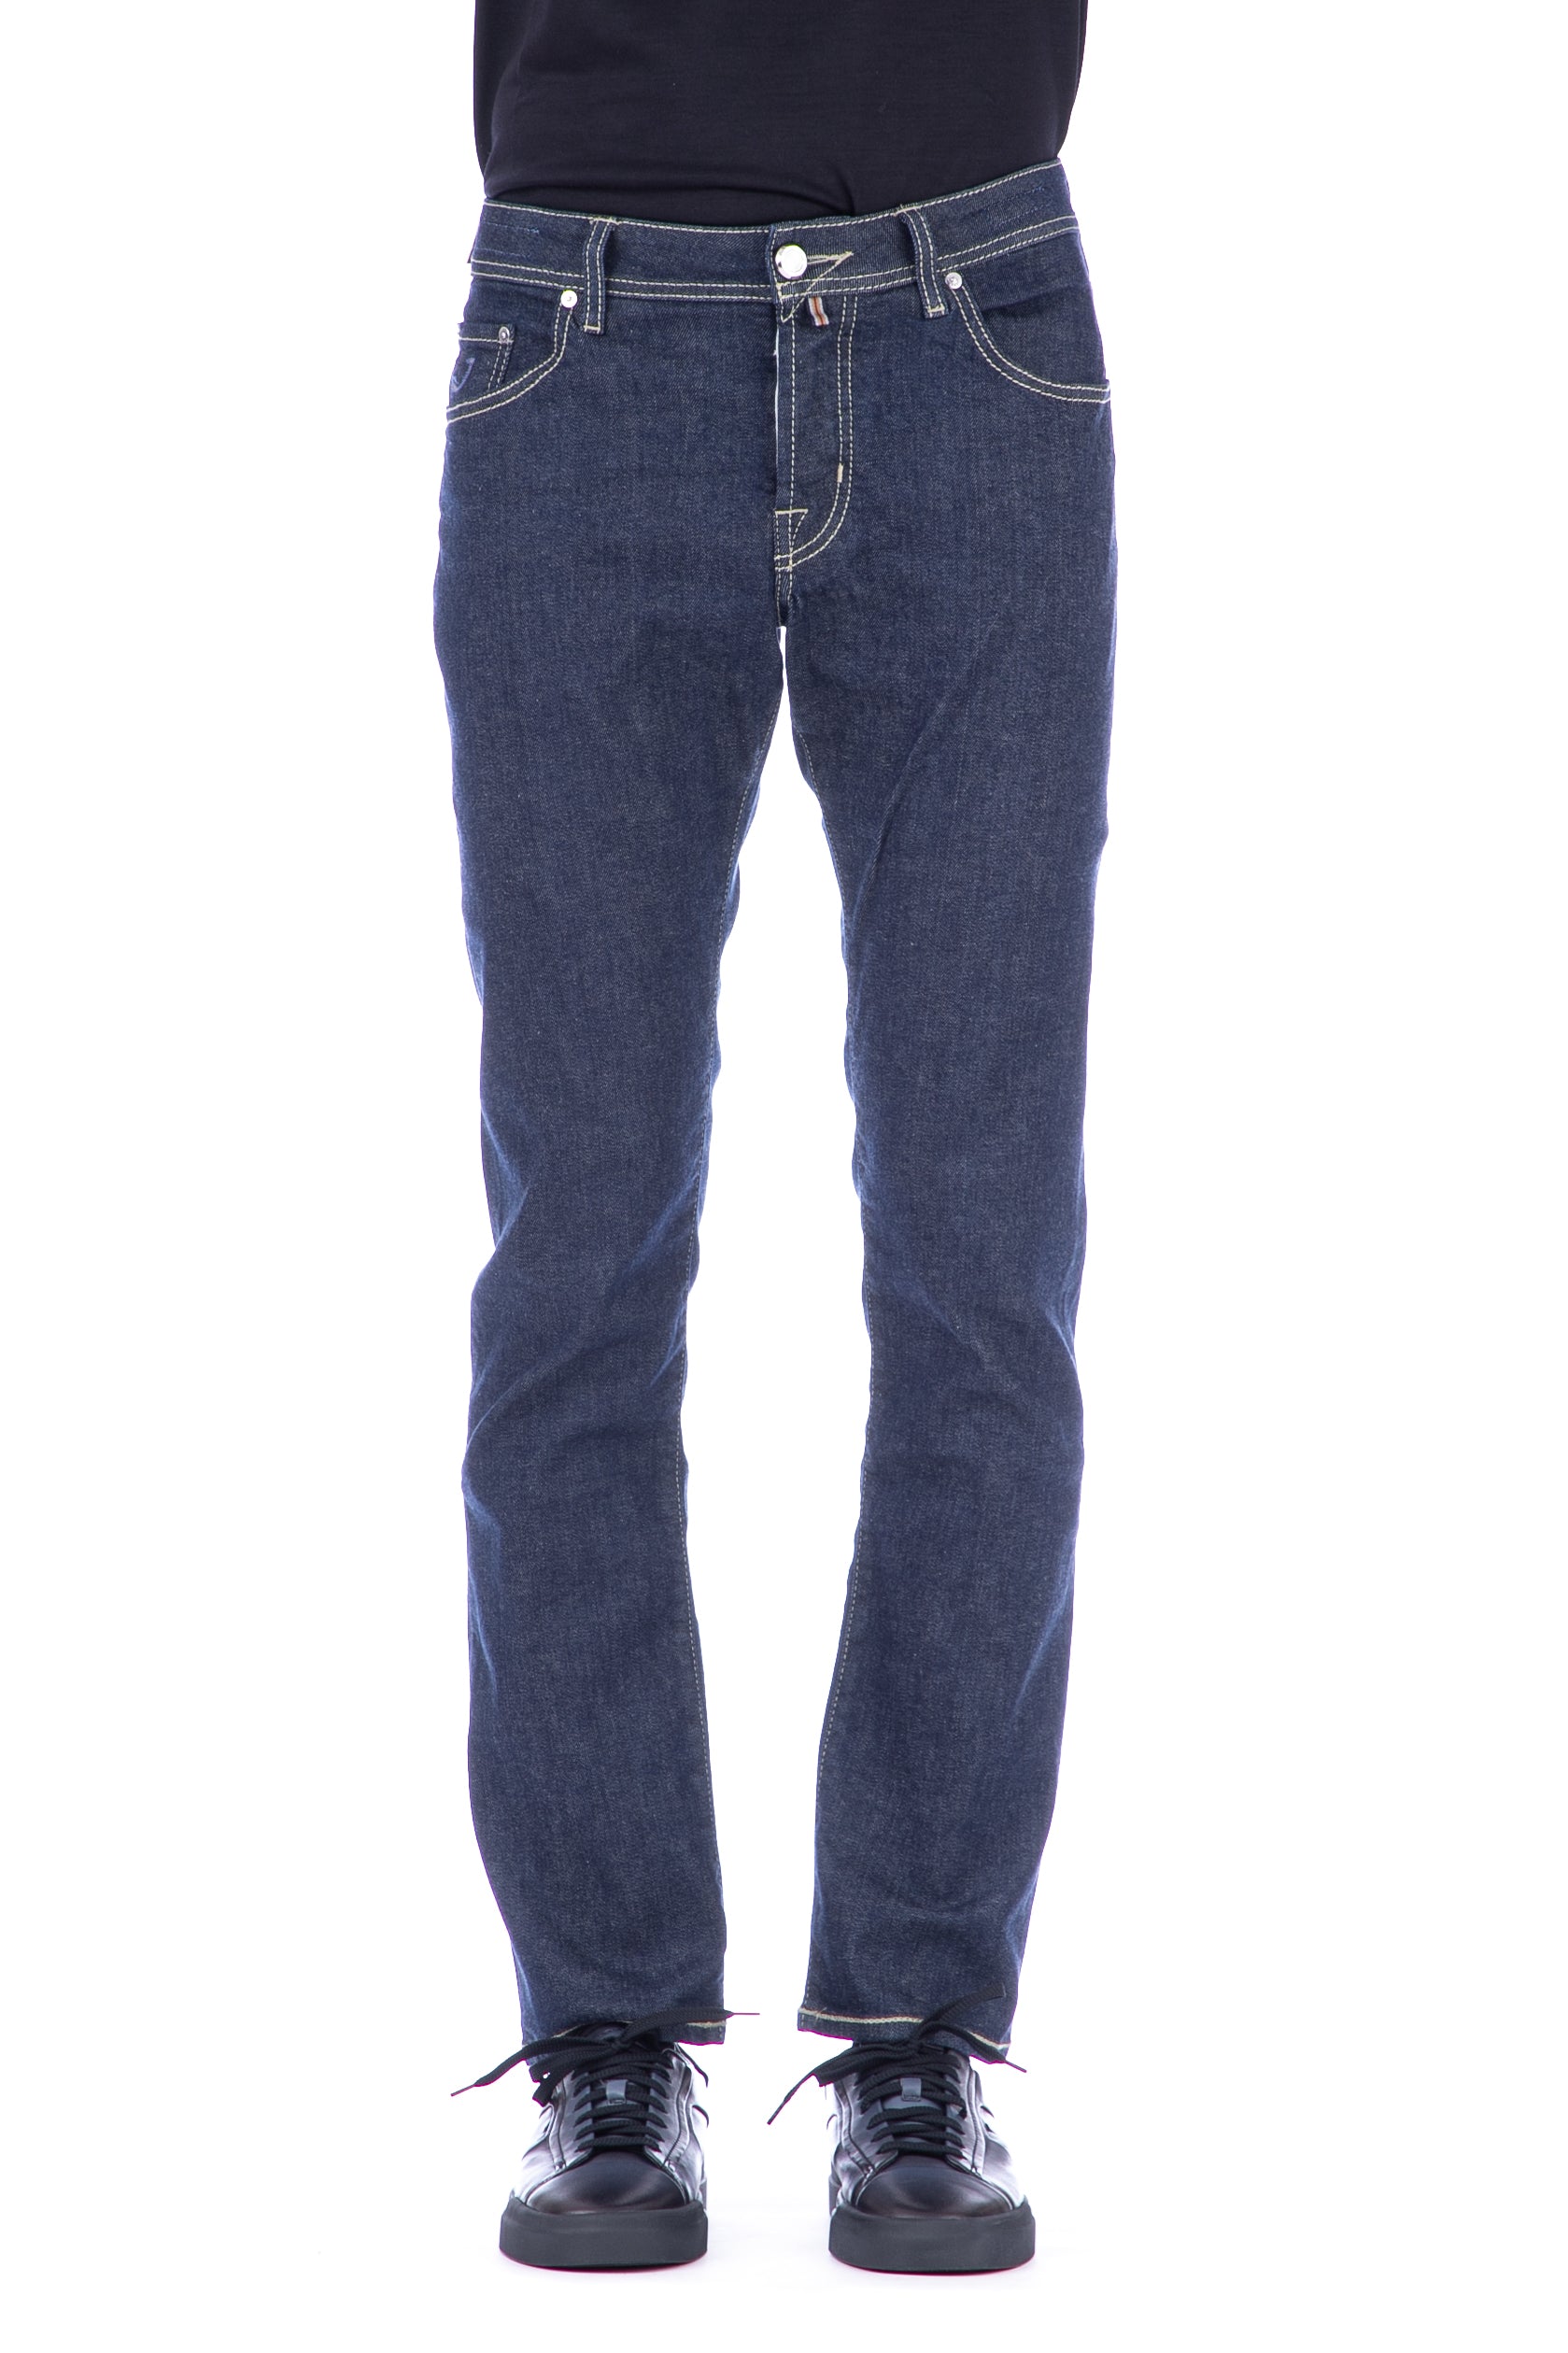 Limited edition blue label nick fit jeans